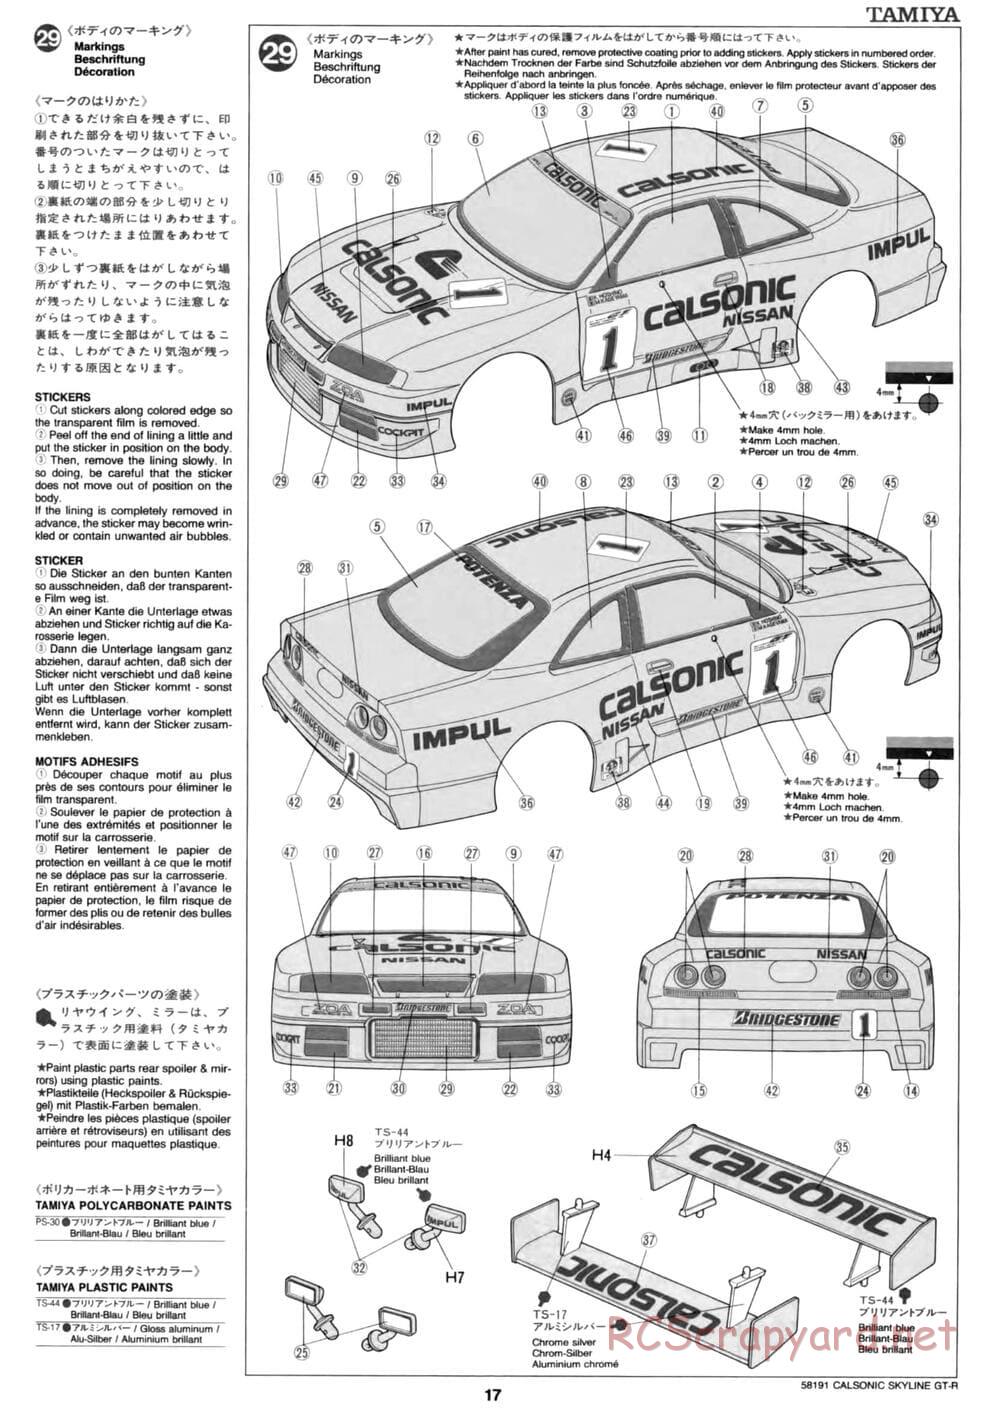 Tamiya - Calsonic Skyline GT-R - TL-01 Chassis - Manual - Page 17